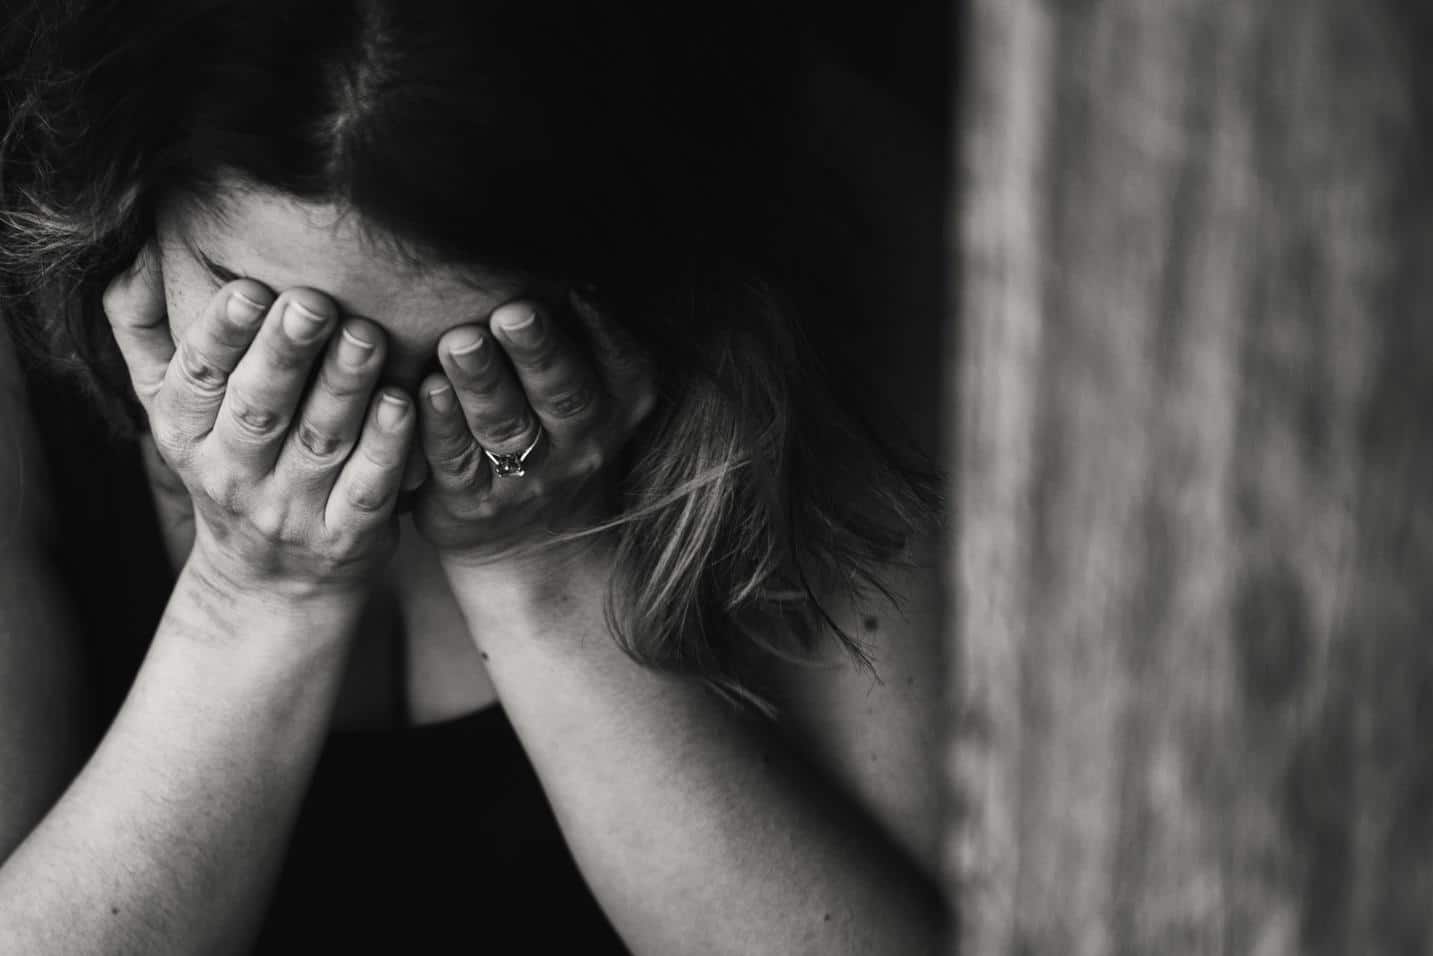 <a href="https://www.pexels.com/photo/grayscale-photography-of-crying-woman-568027/" target="_blank" rel="noopener">Kat Jayne</a> at Pexels